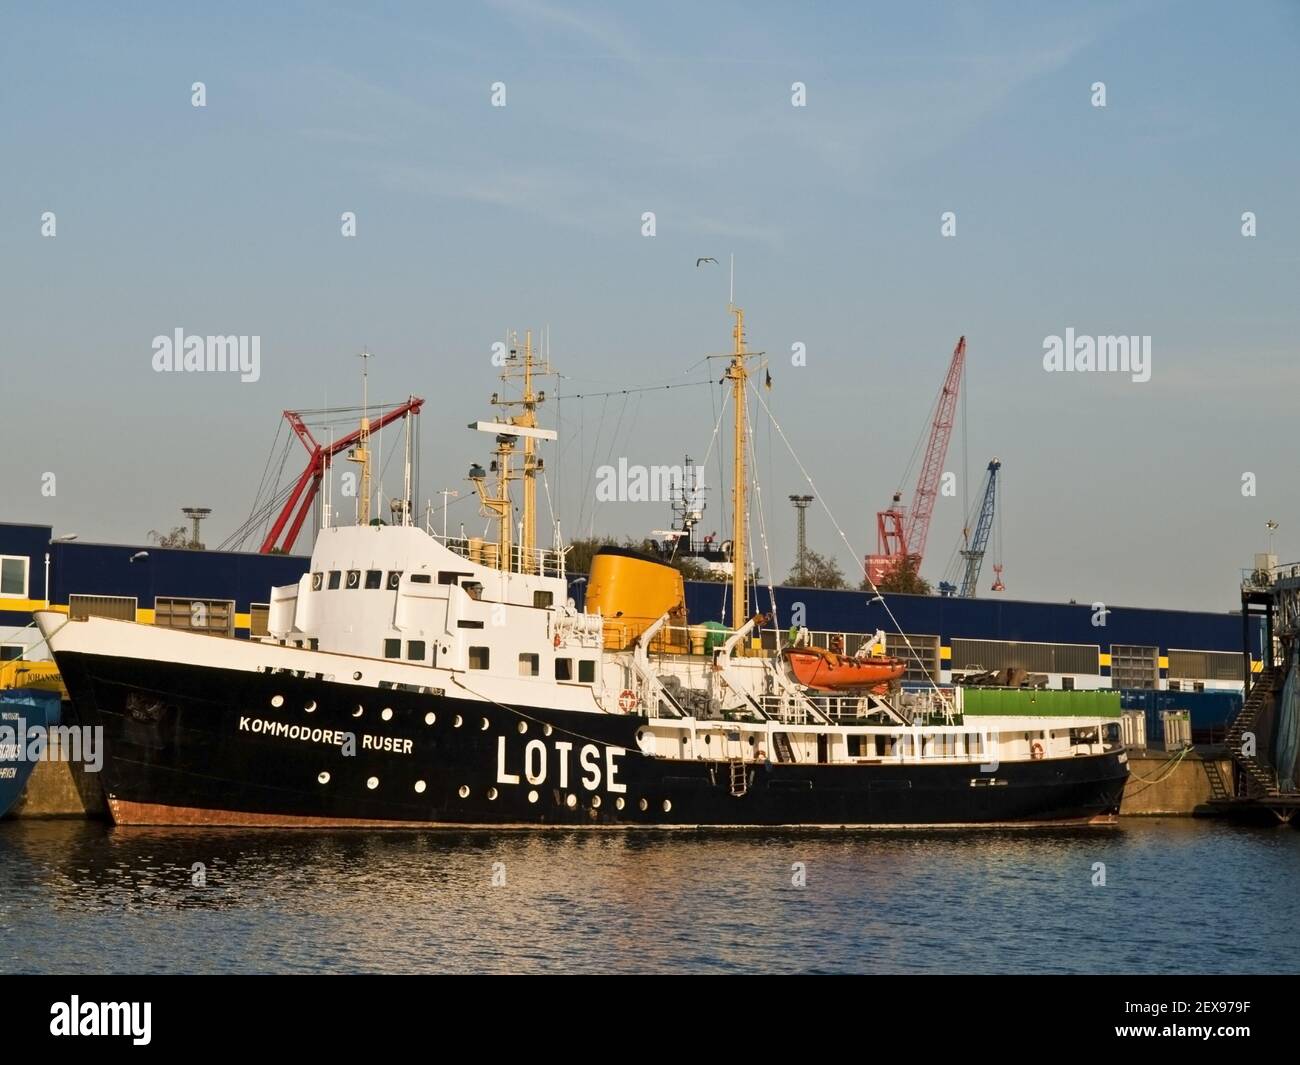 Pilot Station Ship Kommodore Ruser in Cuxhaven, Stock Photo